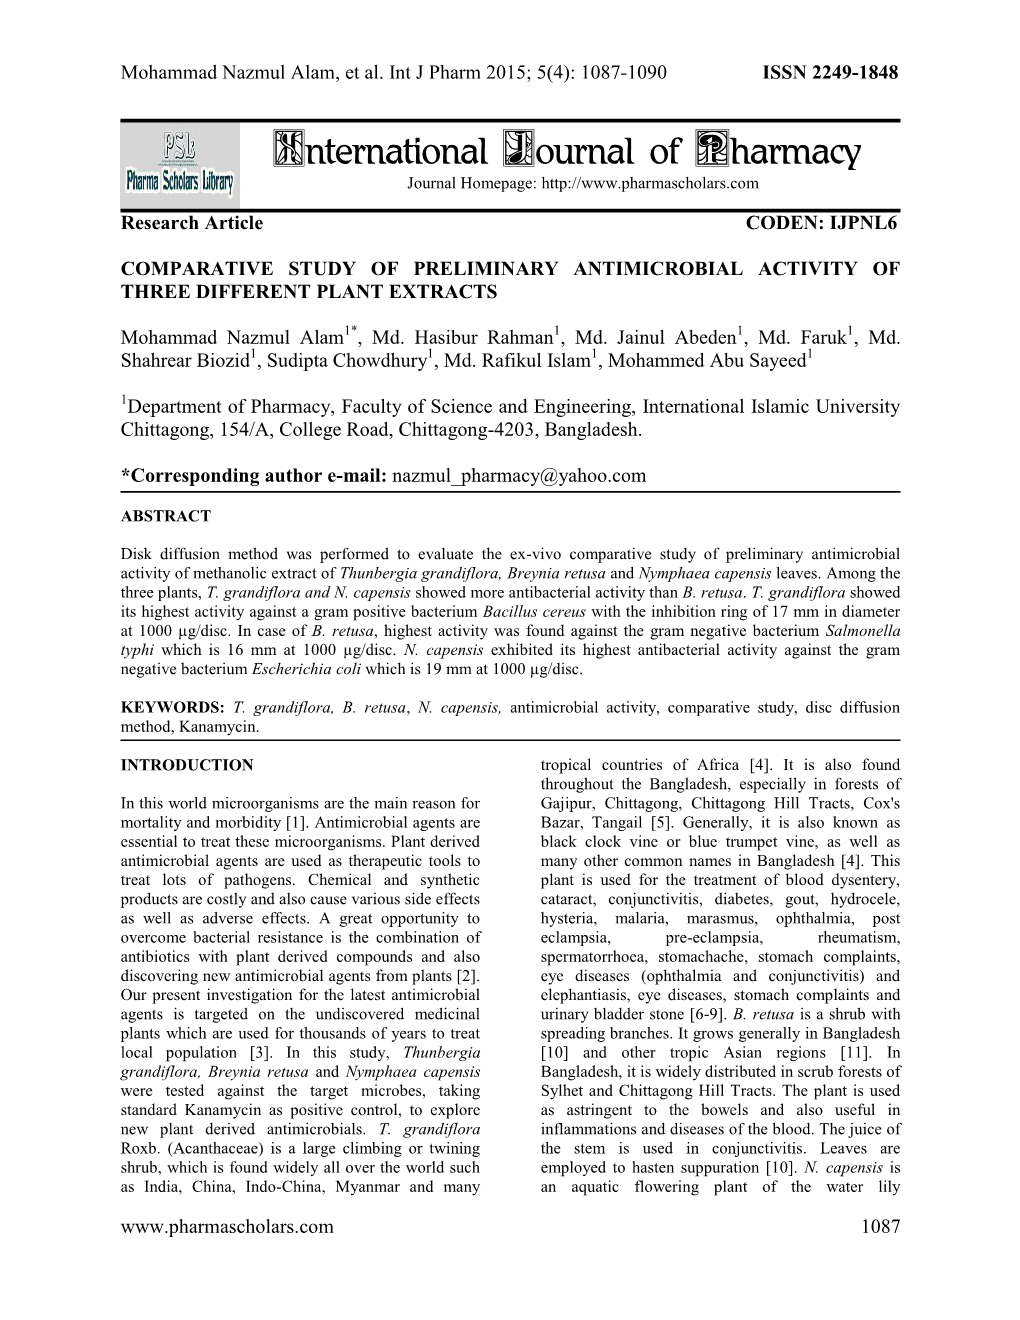 Comparative Study of Preliminary Antimicrobial Activity of Three Different Plant Extracts